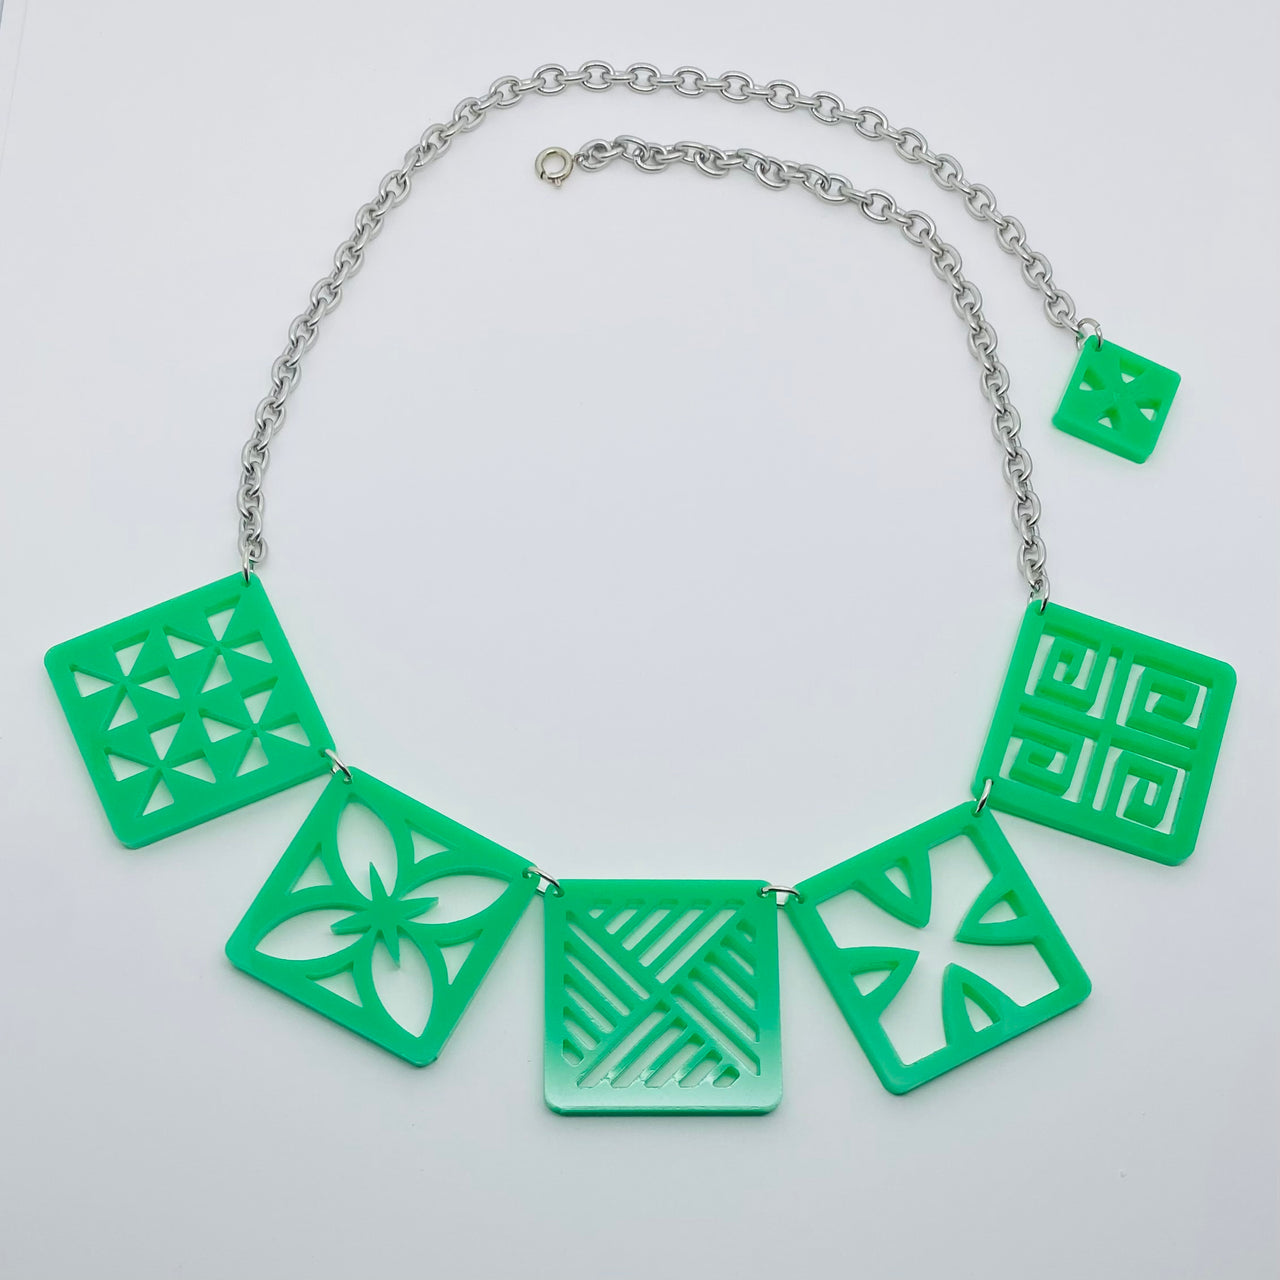 Flare Tiki Tapa Necklace in Kelly Green